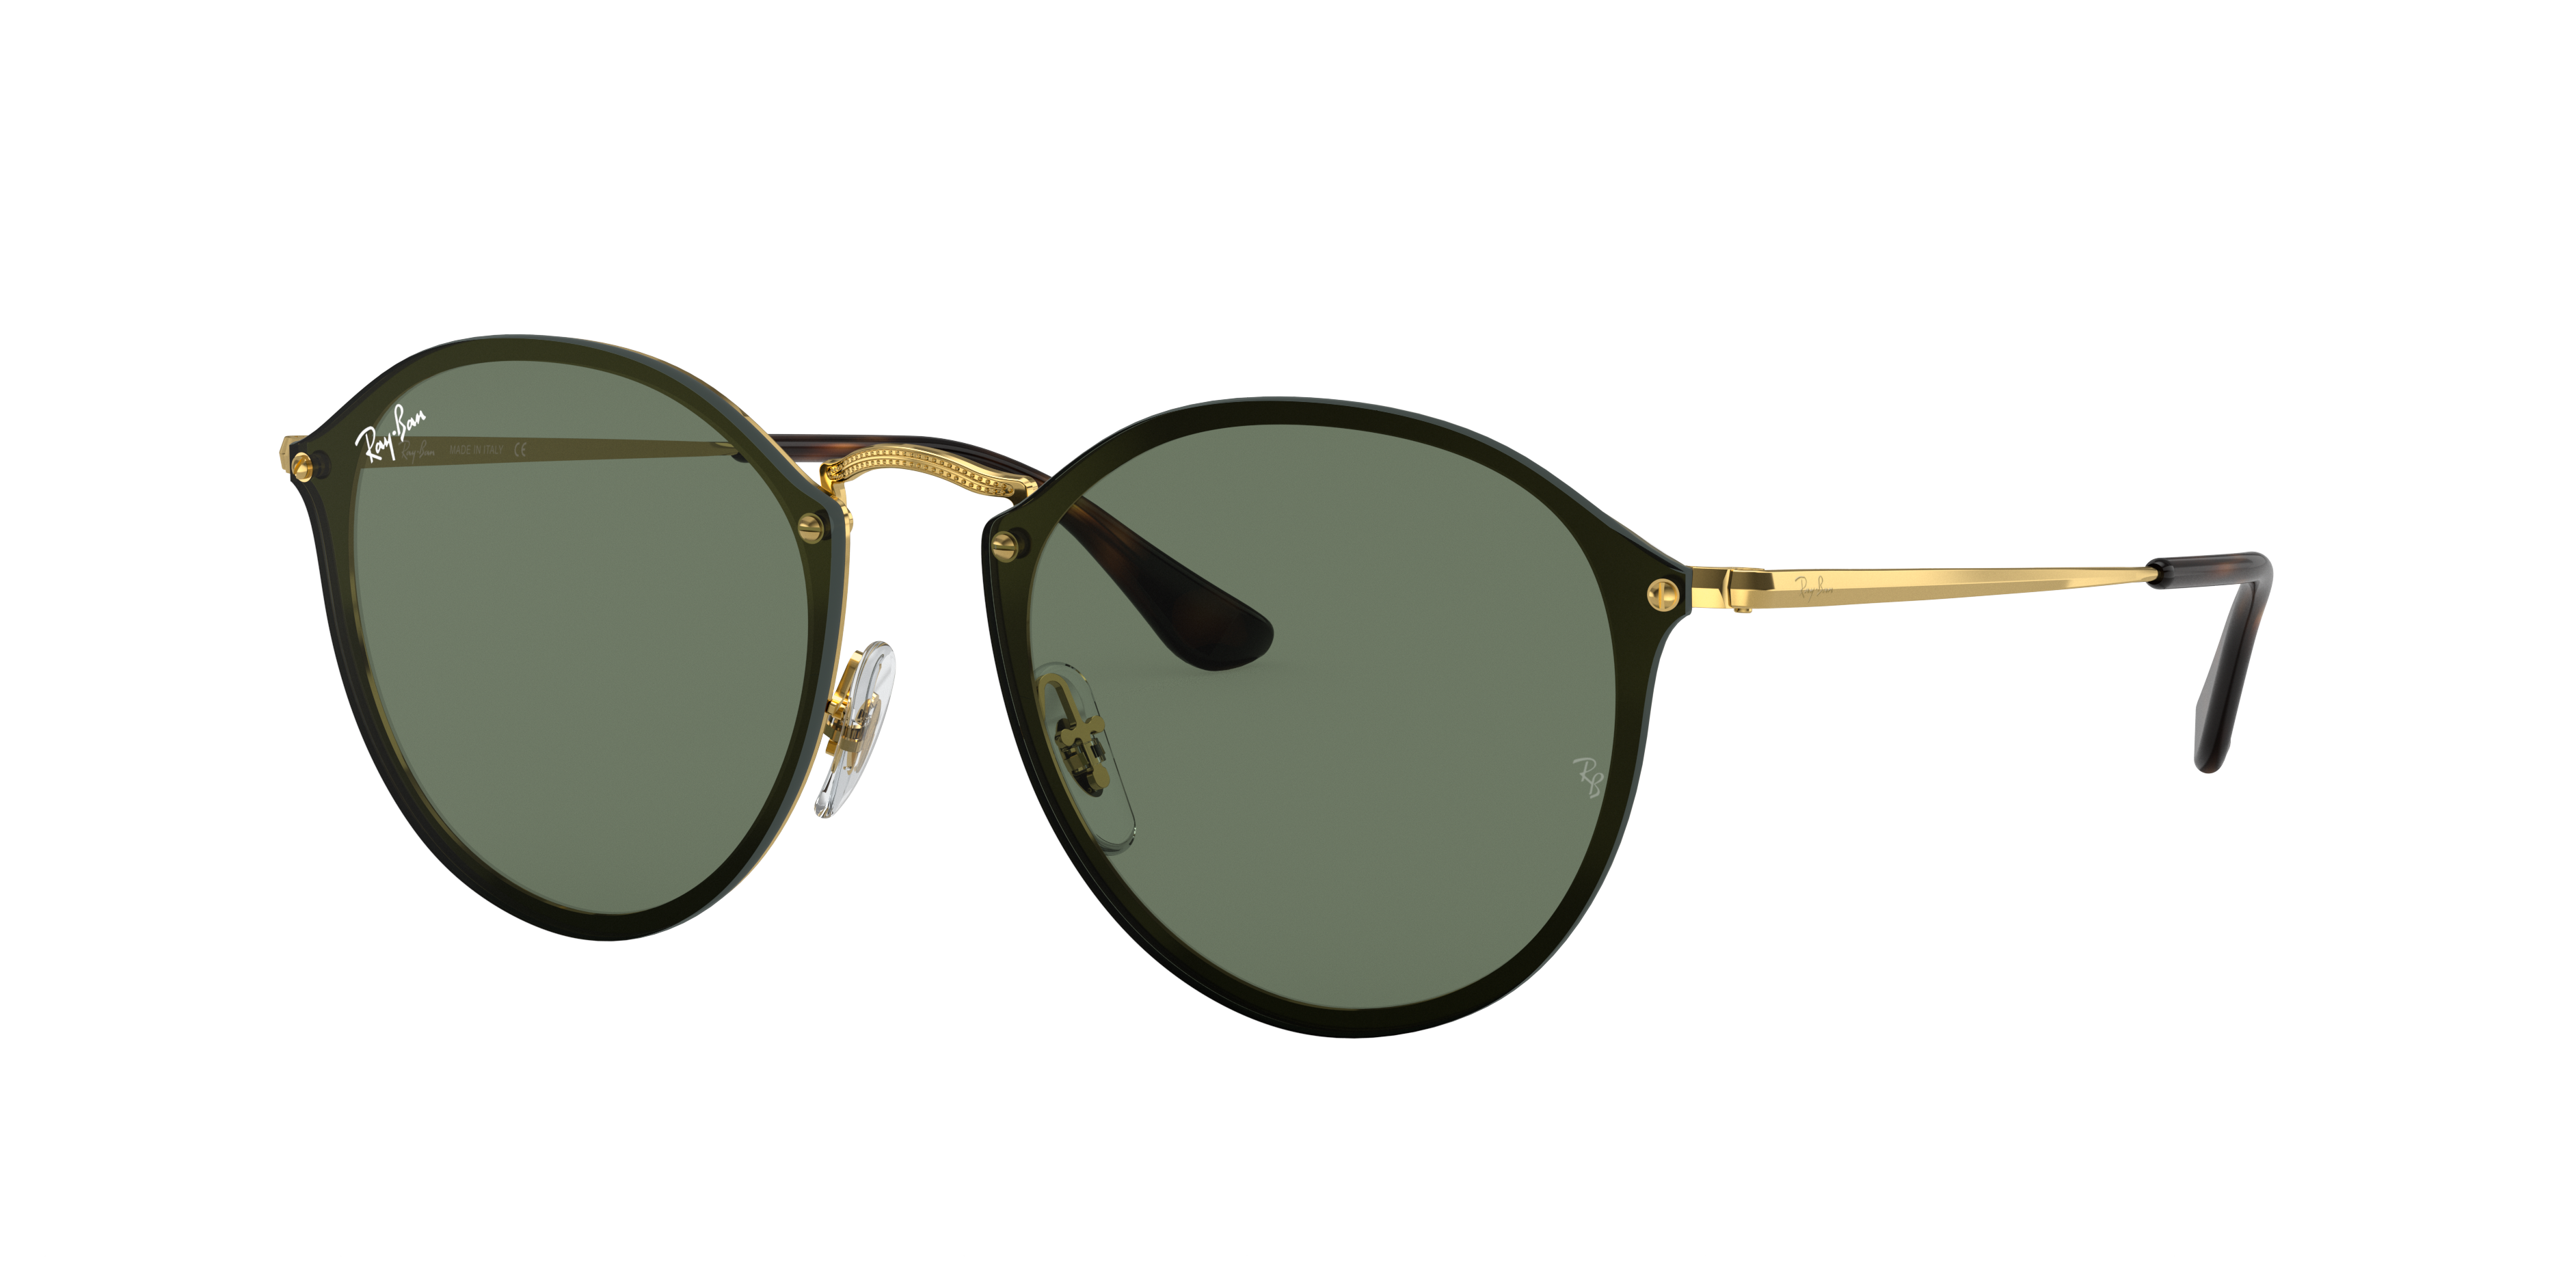 Check out the Blaze Round at ray-ban.com